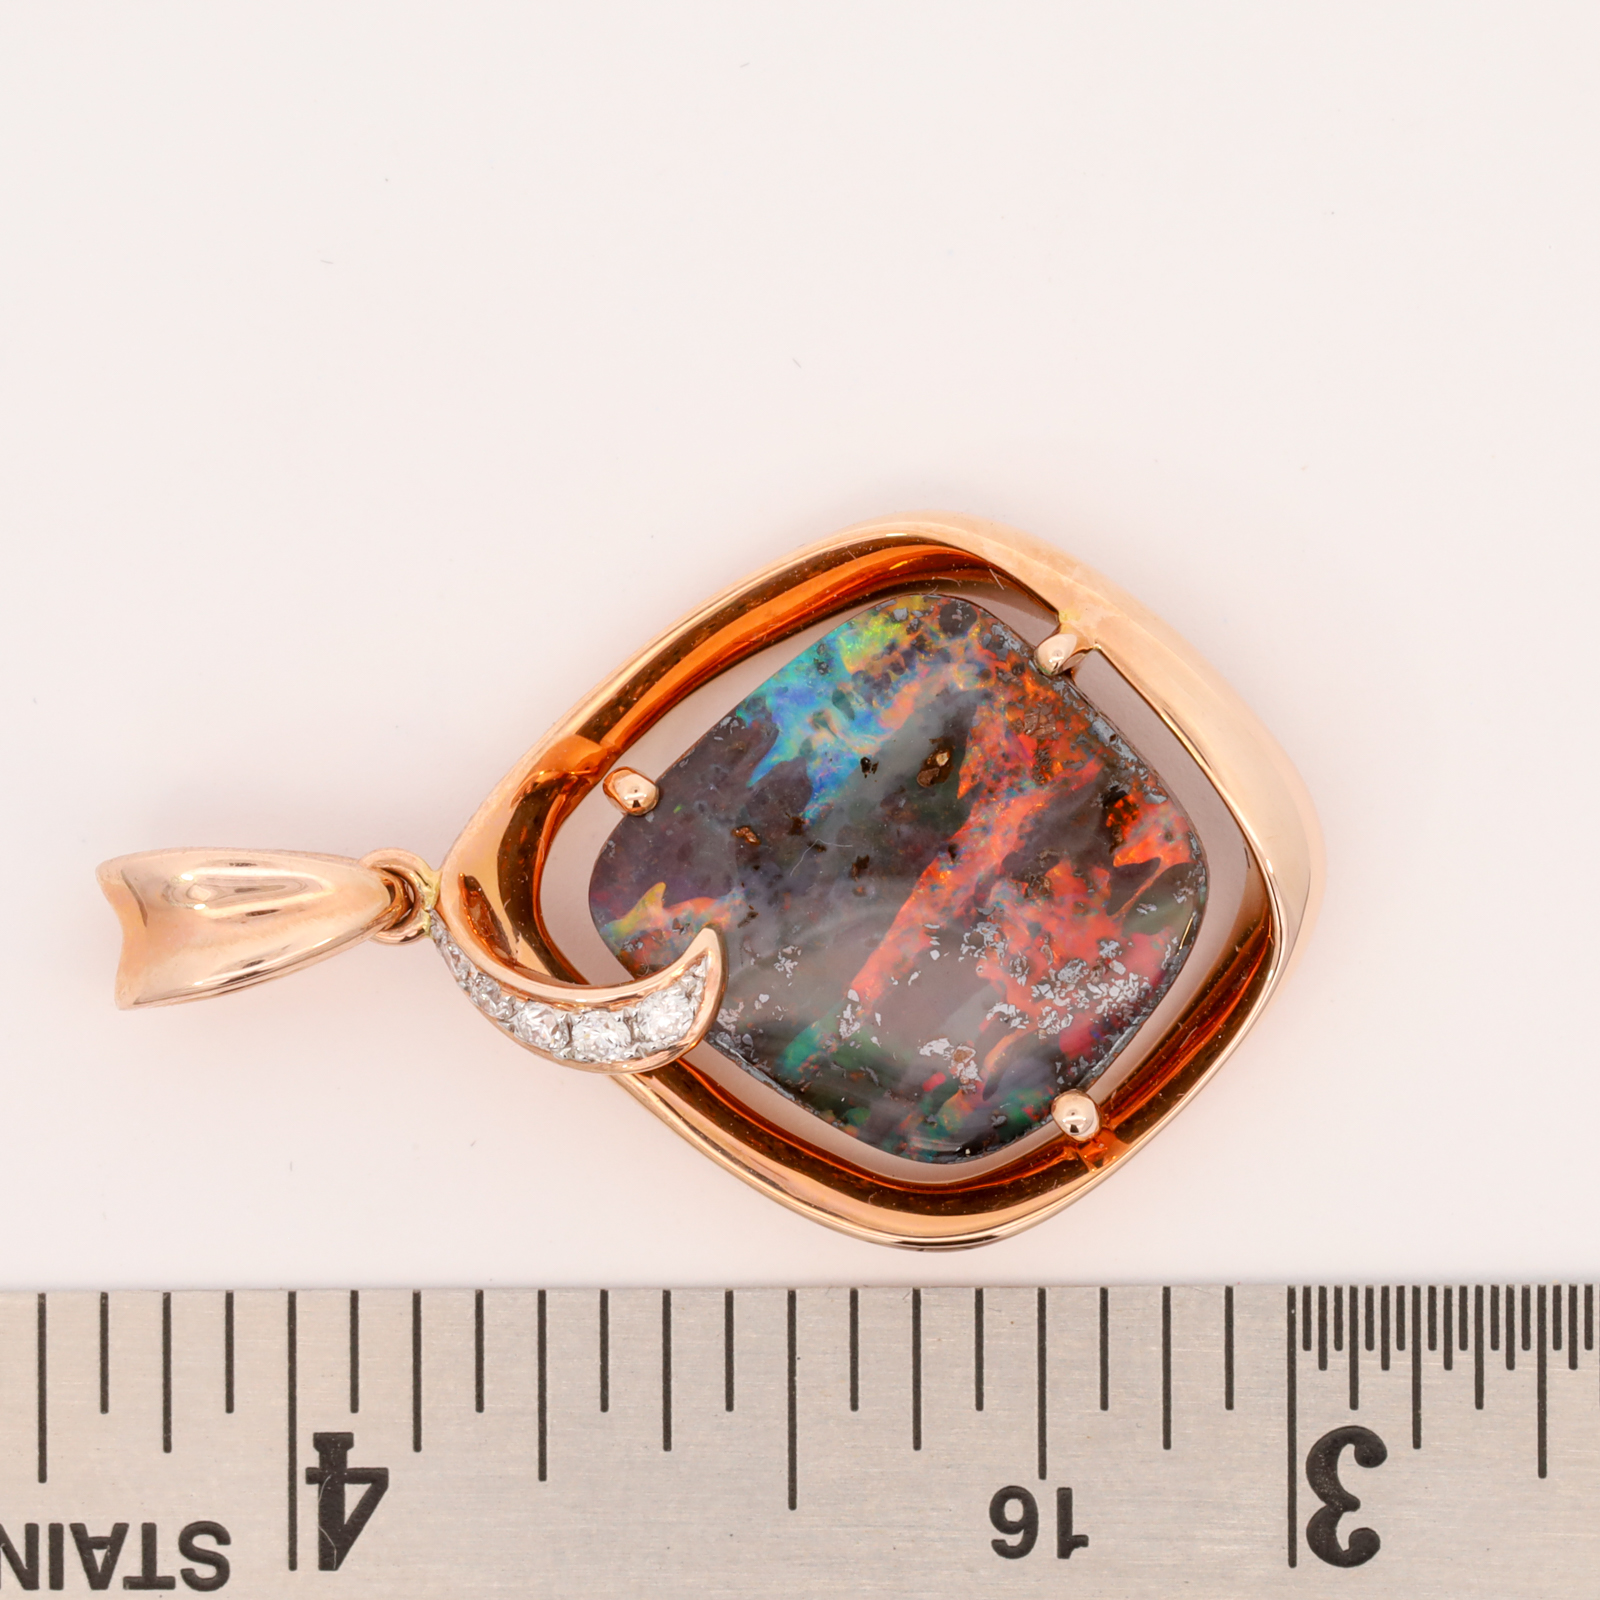 Rose Gold Red Green Orange Solid Australian Boulder Opal Necklace Pendant with Diamonds